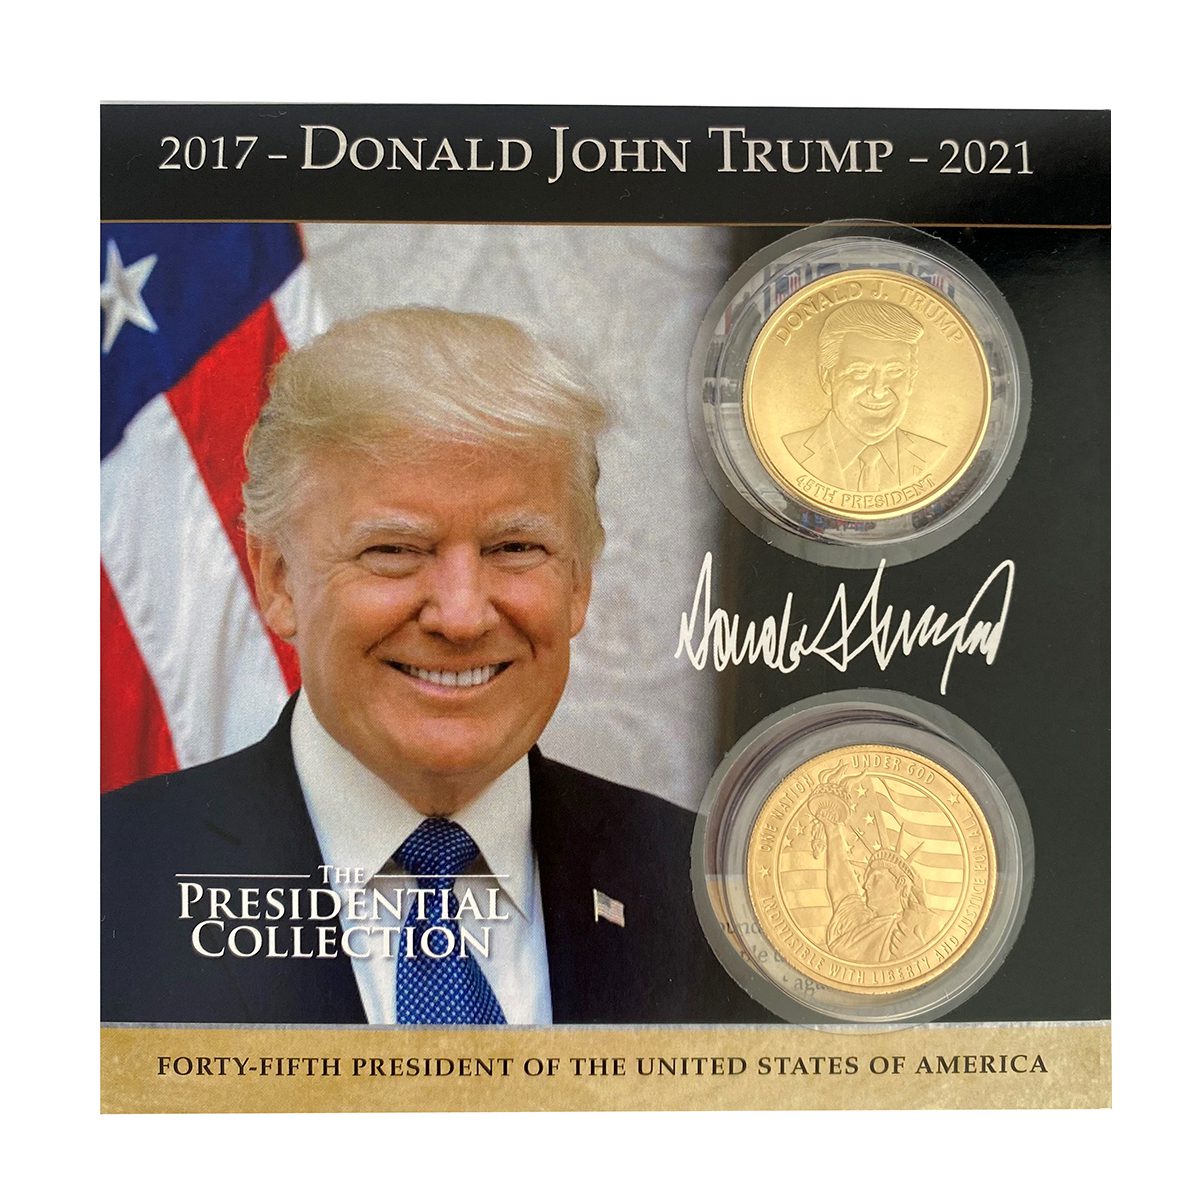 12 Pcs 12 Pcs Trump Coin Keep America Great Challenge Coin American Eagle Commemorative Coin 41mm Stunning Proof Coin Re-Election Collectors Edition Series 